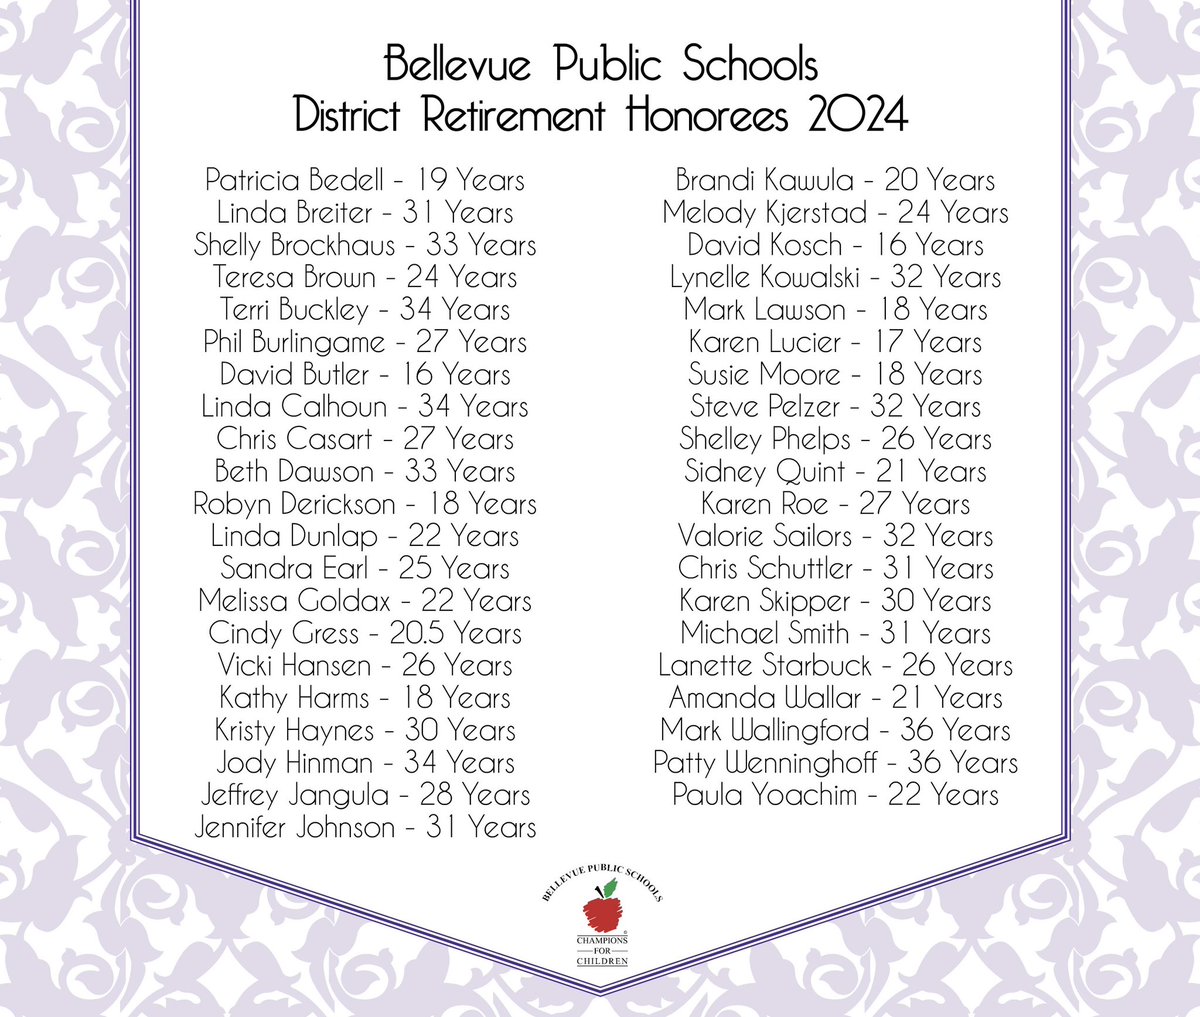 Bellevue Public Schools honored our 2023-24 Retirement/Resignation recipients. The Honorees exemplify dedication, hard work & commitment to our students, families & community.
 
Congratulations & Thank You! You’ll always be a member of TeamBPS💜 #ChampionsForChildren #bpsne